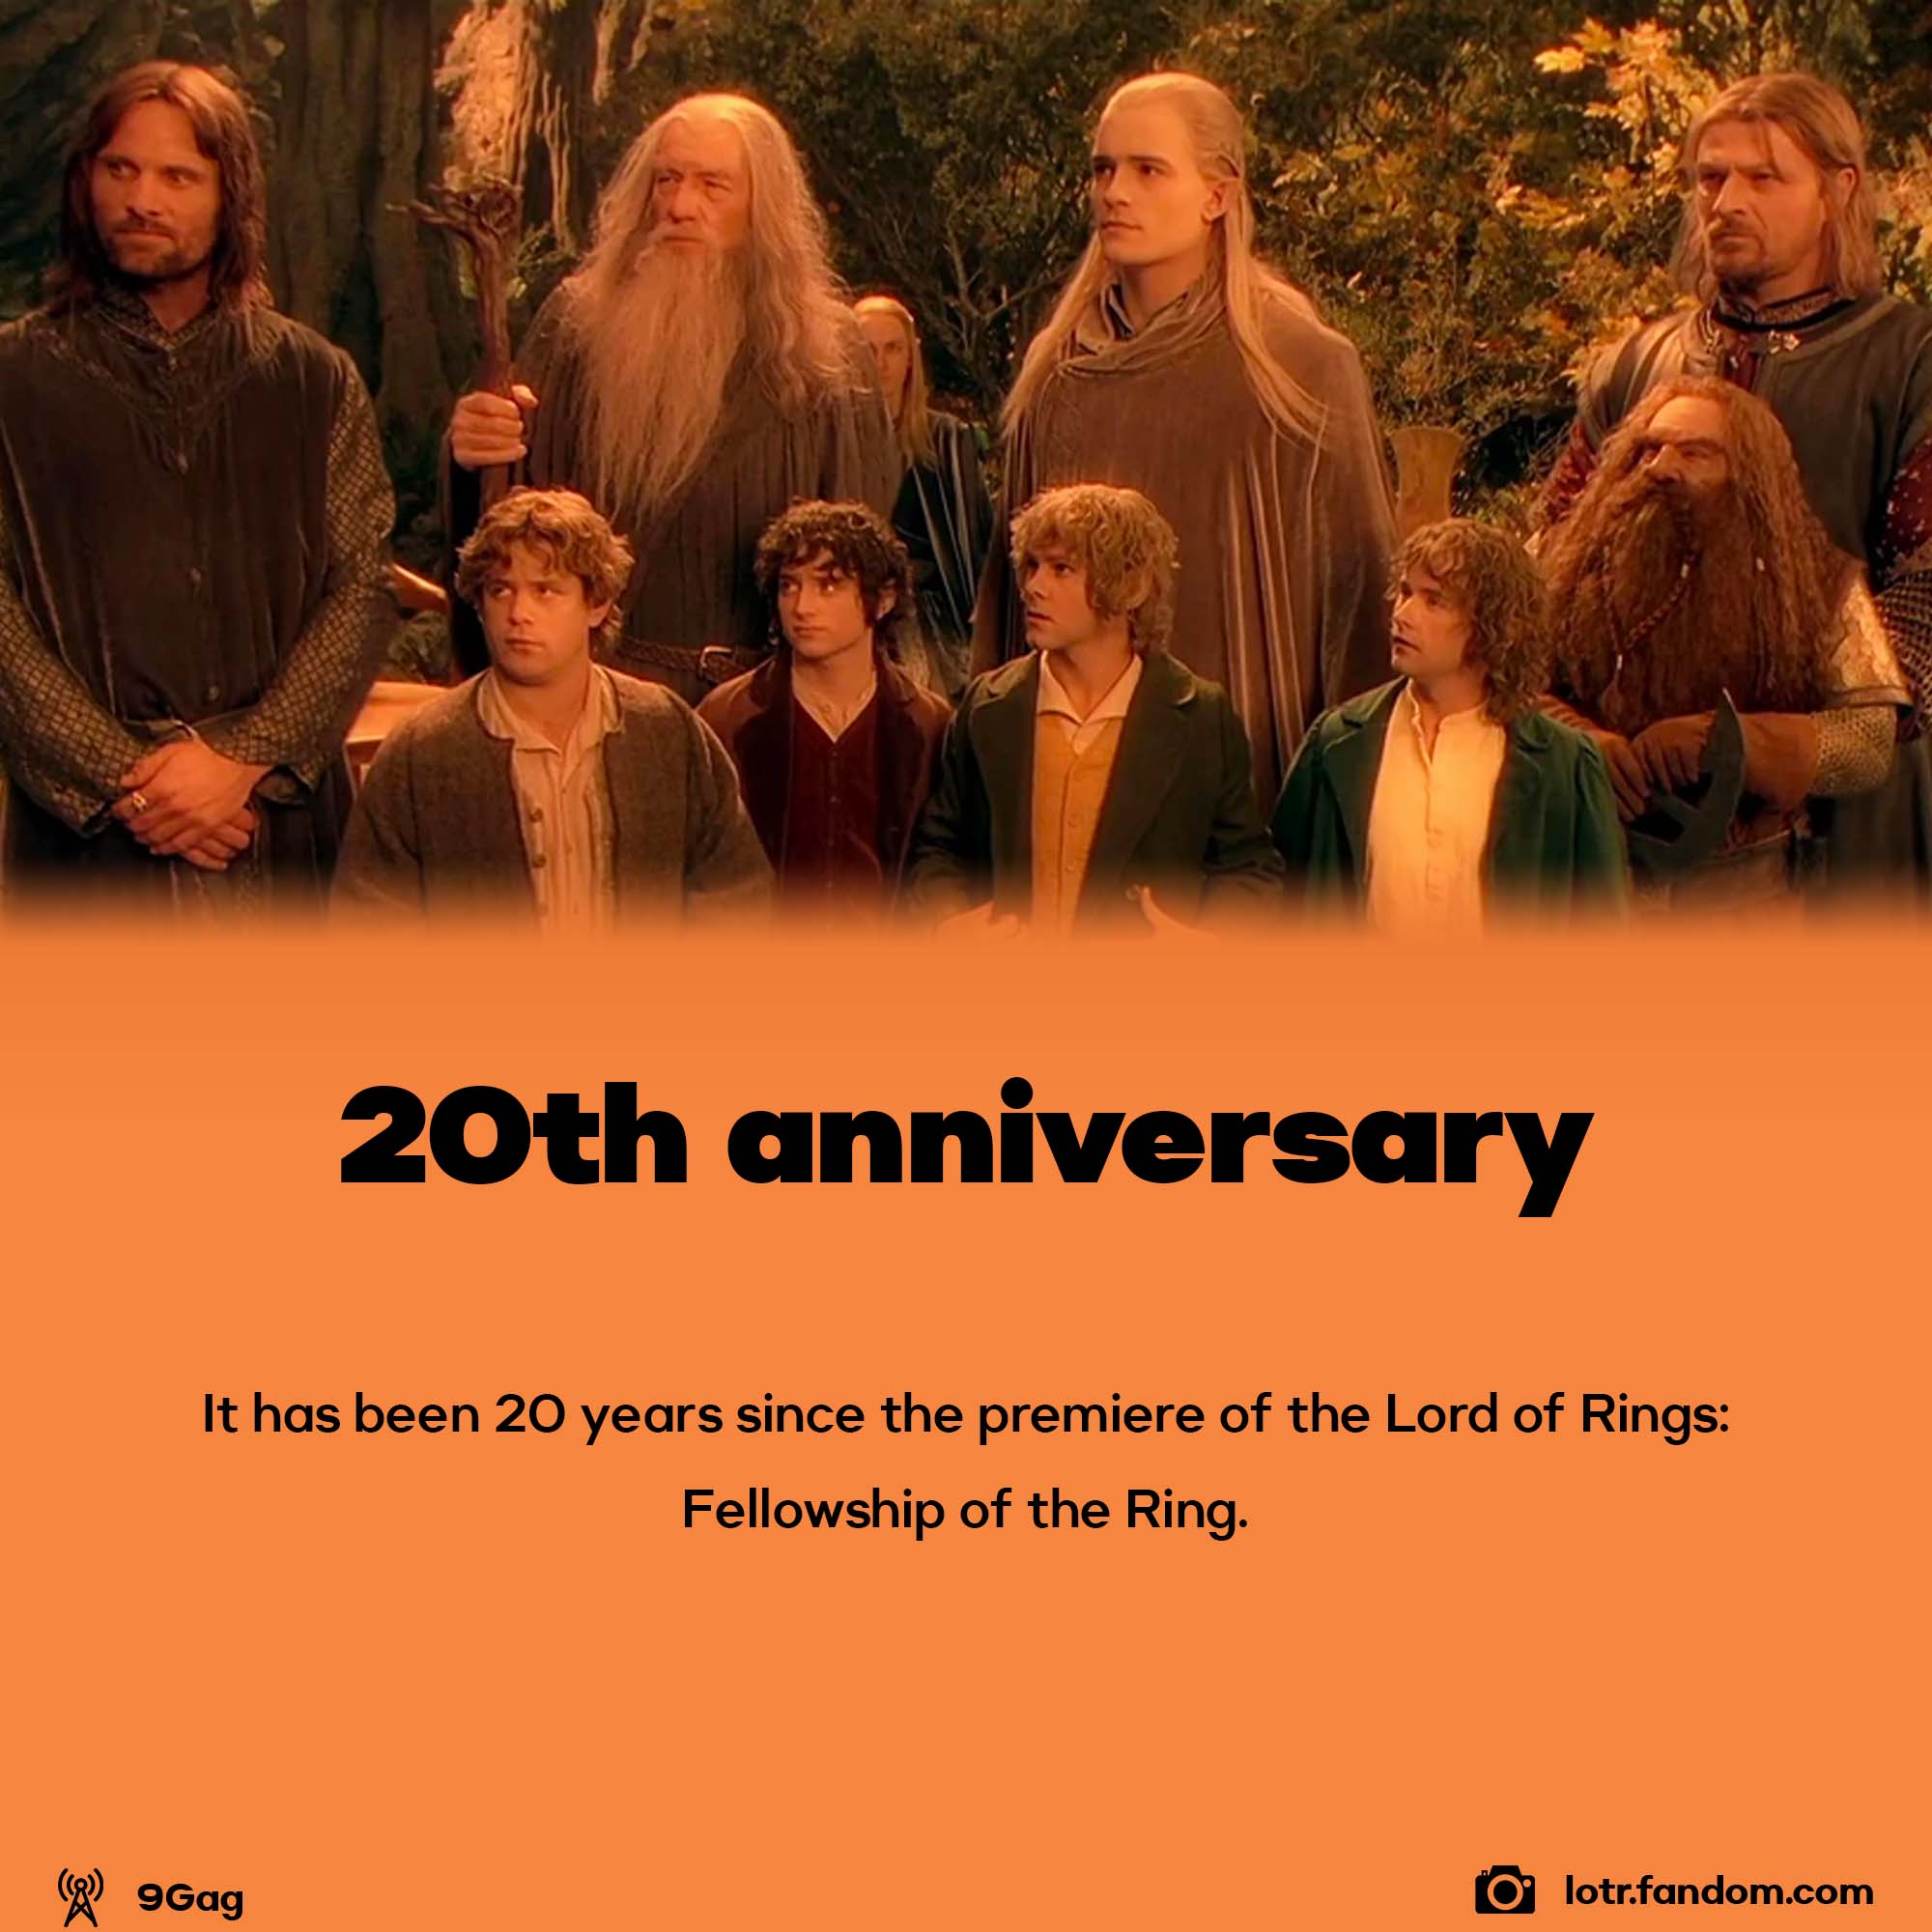 20 years since the premiere of The Fellowship of the Ring